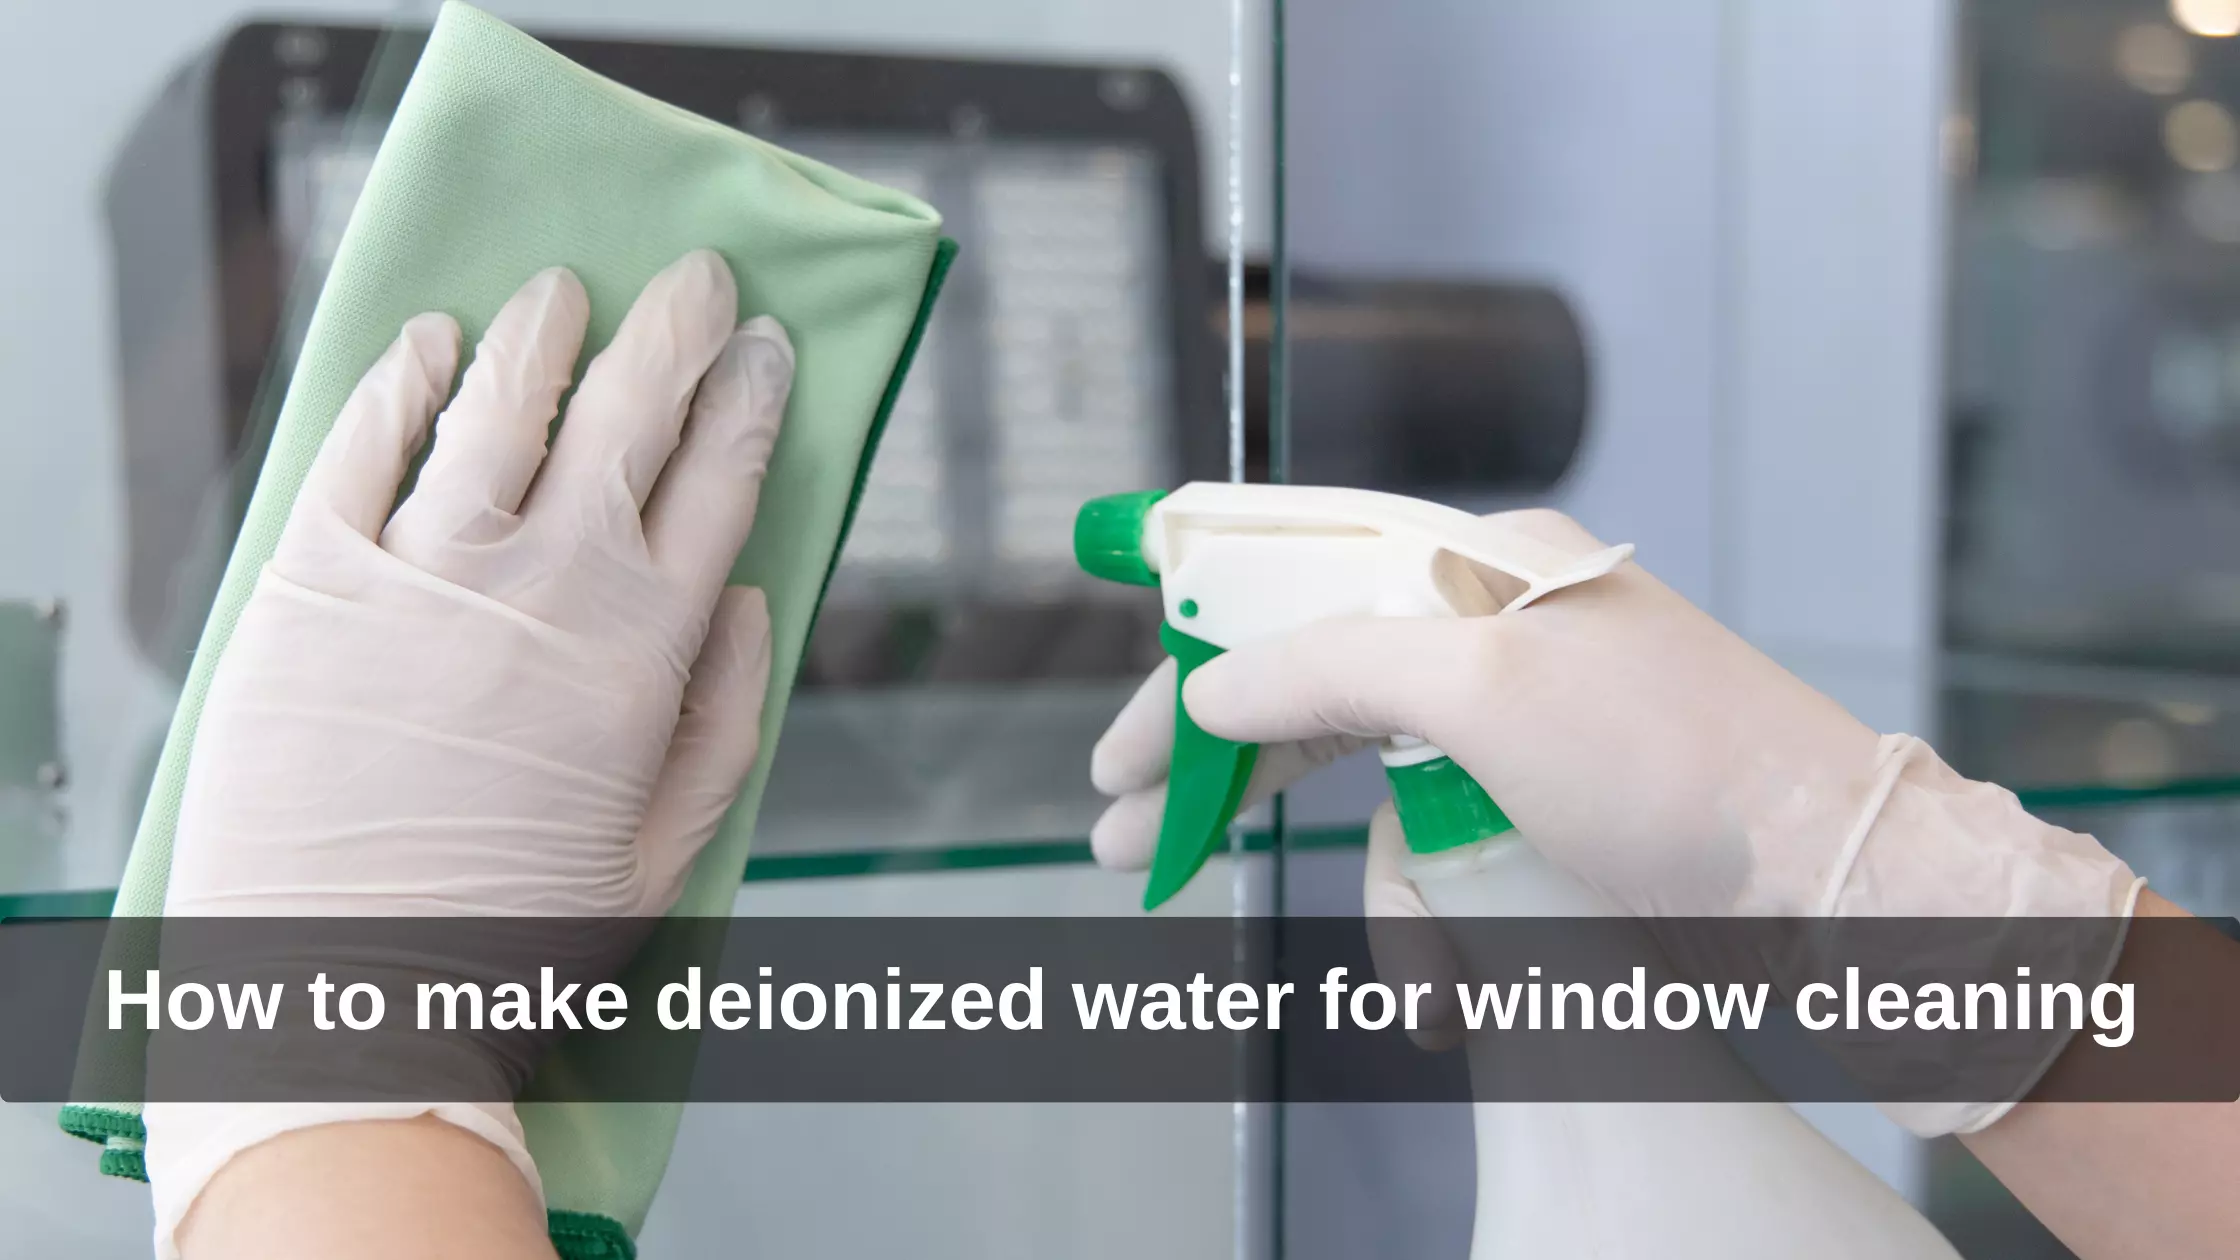 How to make deionized water for window cleaning